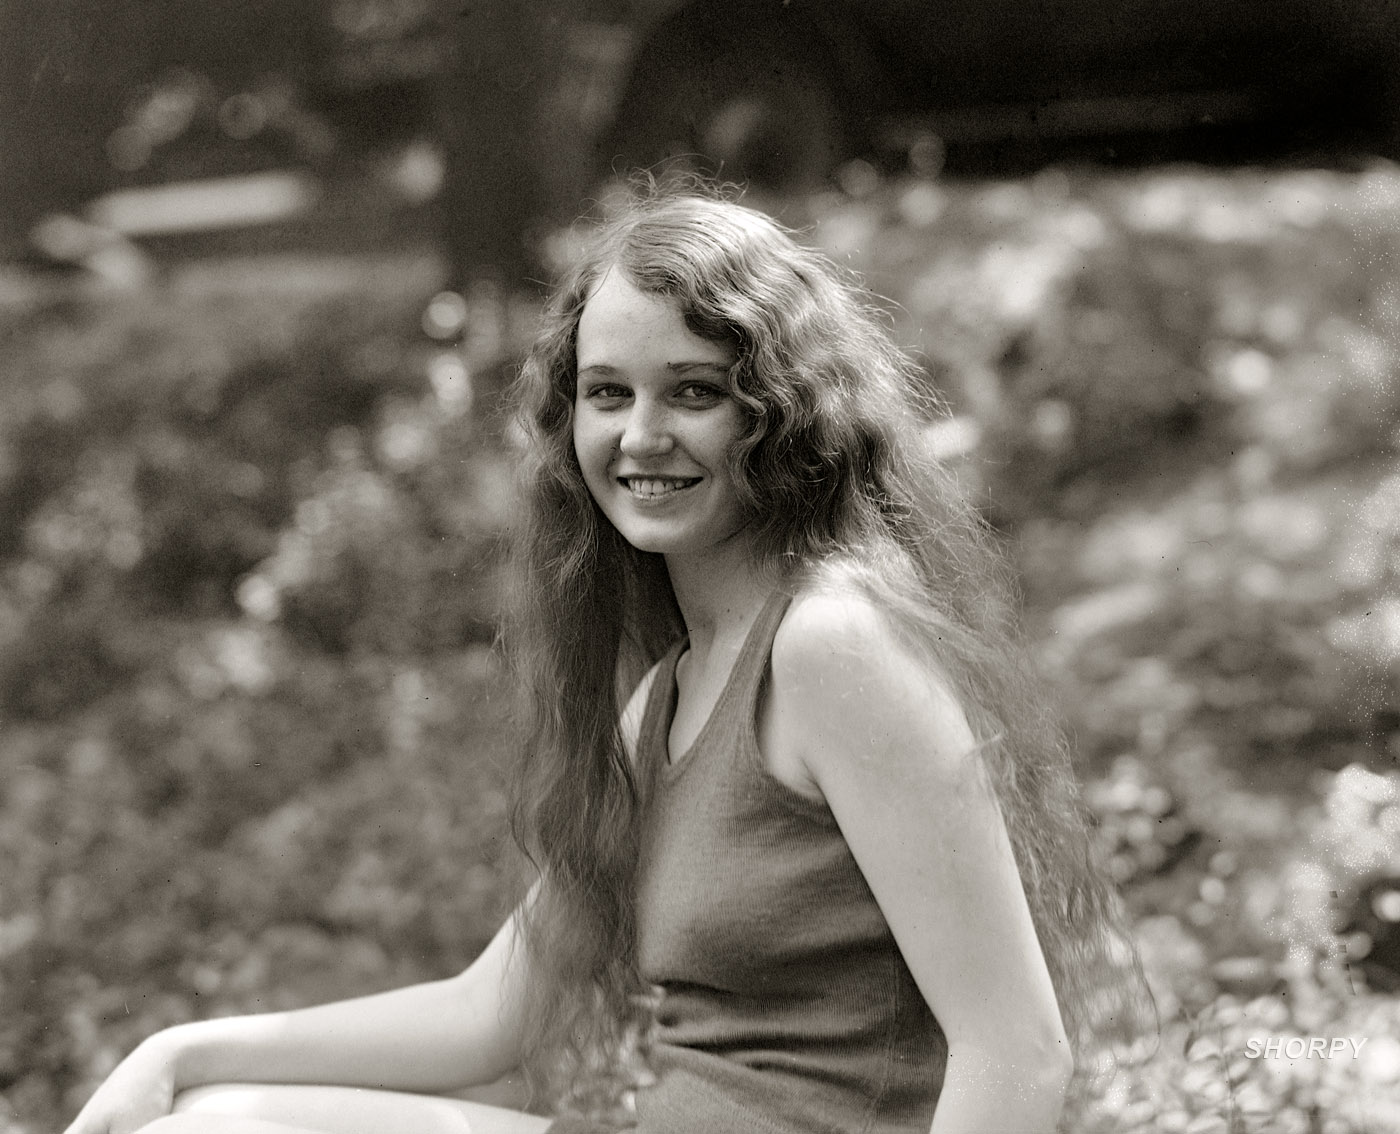 August 2, 1926. "Miss Marjorie Joesting." Our second look at Marjorie, who was Miss Washington, D.C., and a Miss America runner-up at Atlantic City. National Photo Company Collection glass negative. View full size.